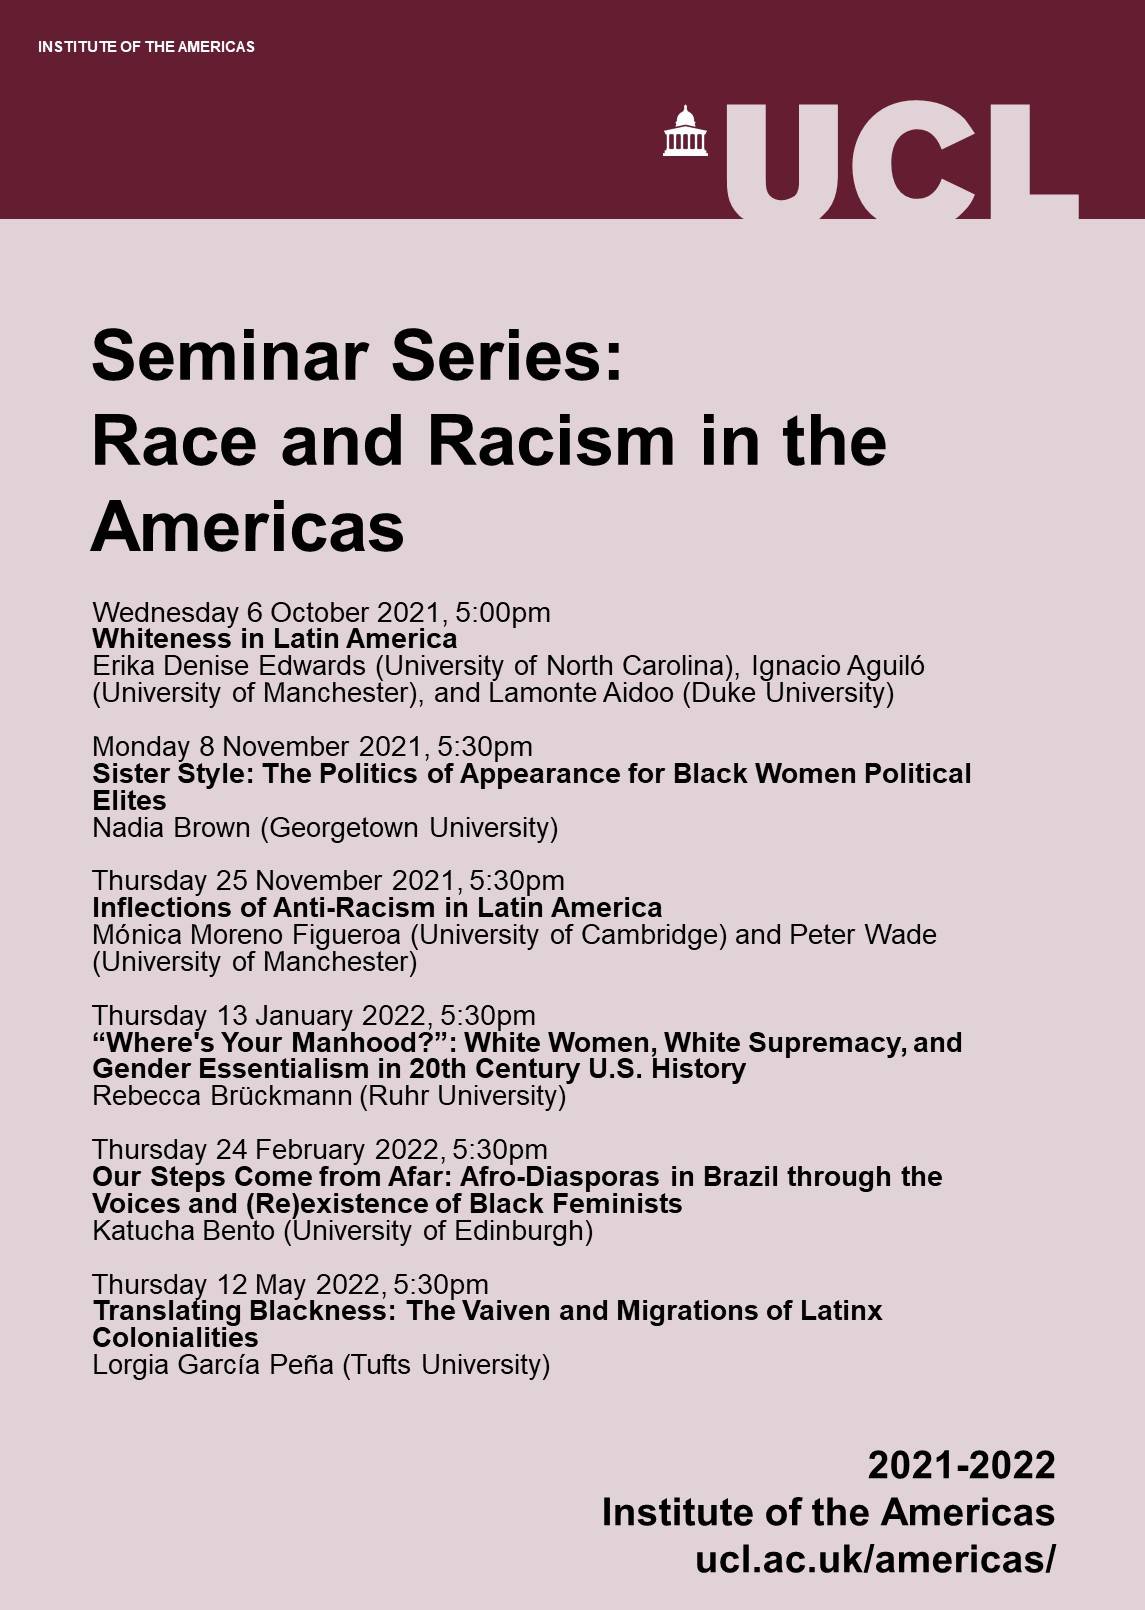 Race and Racism in the Americas series